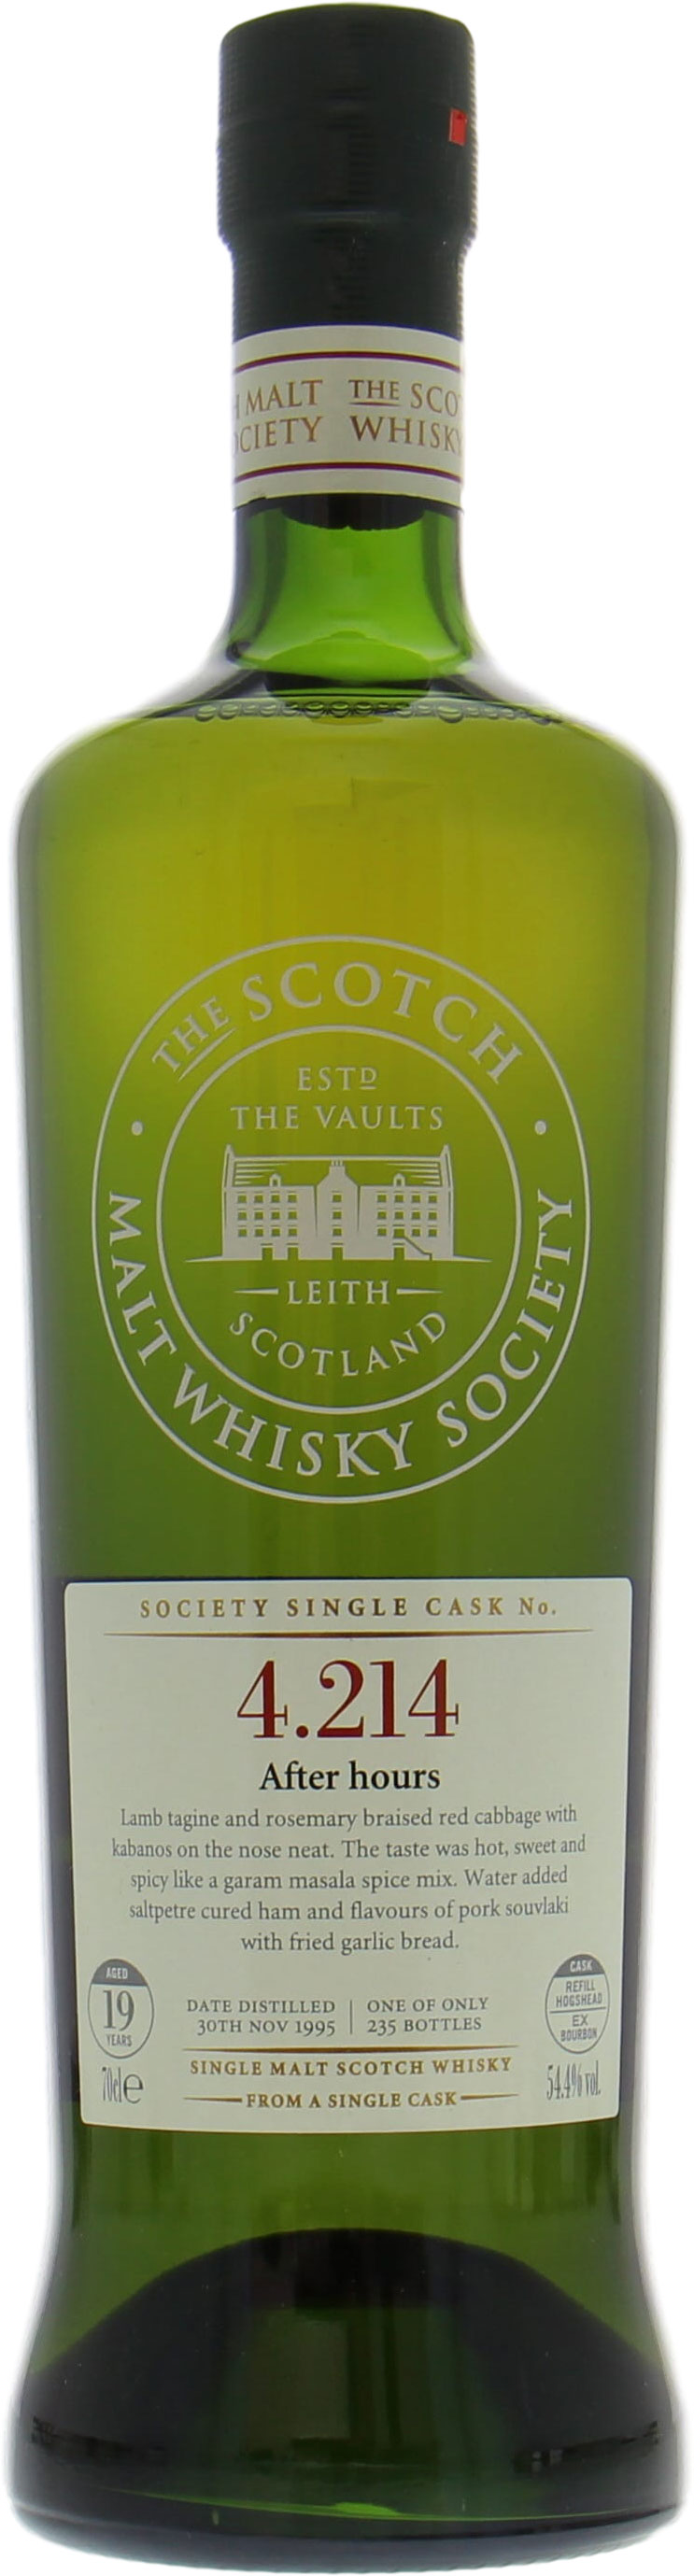 Highland Park - 19 Years Old SMWS 4.214 After Hours 54.5.% 1995